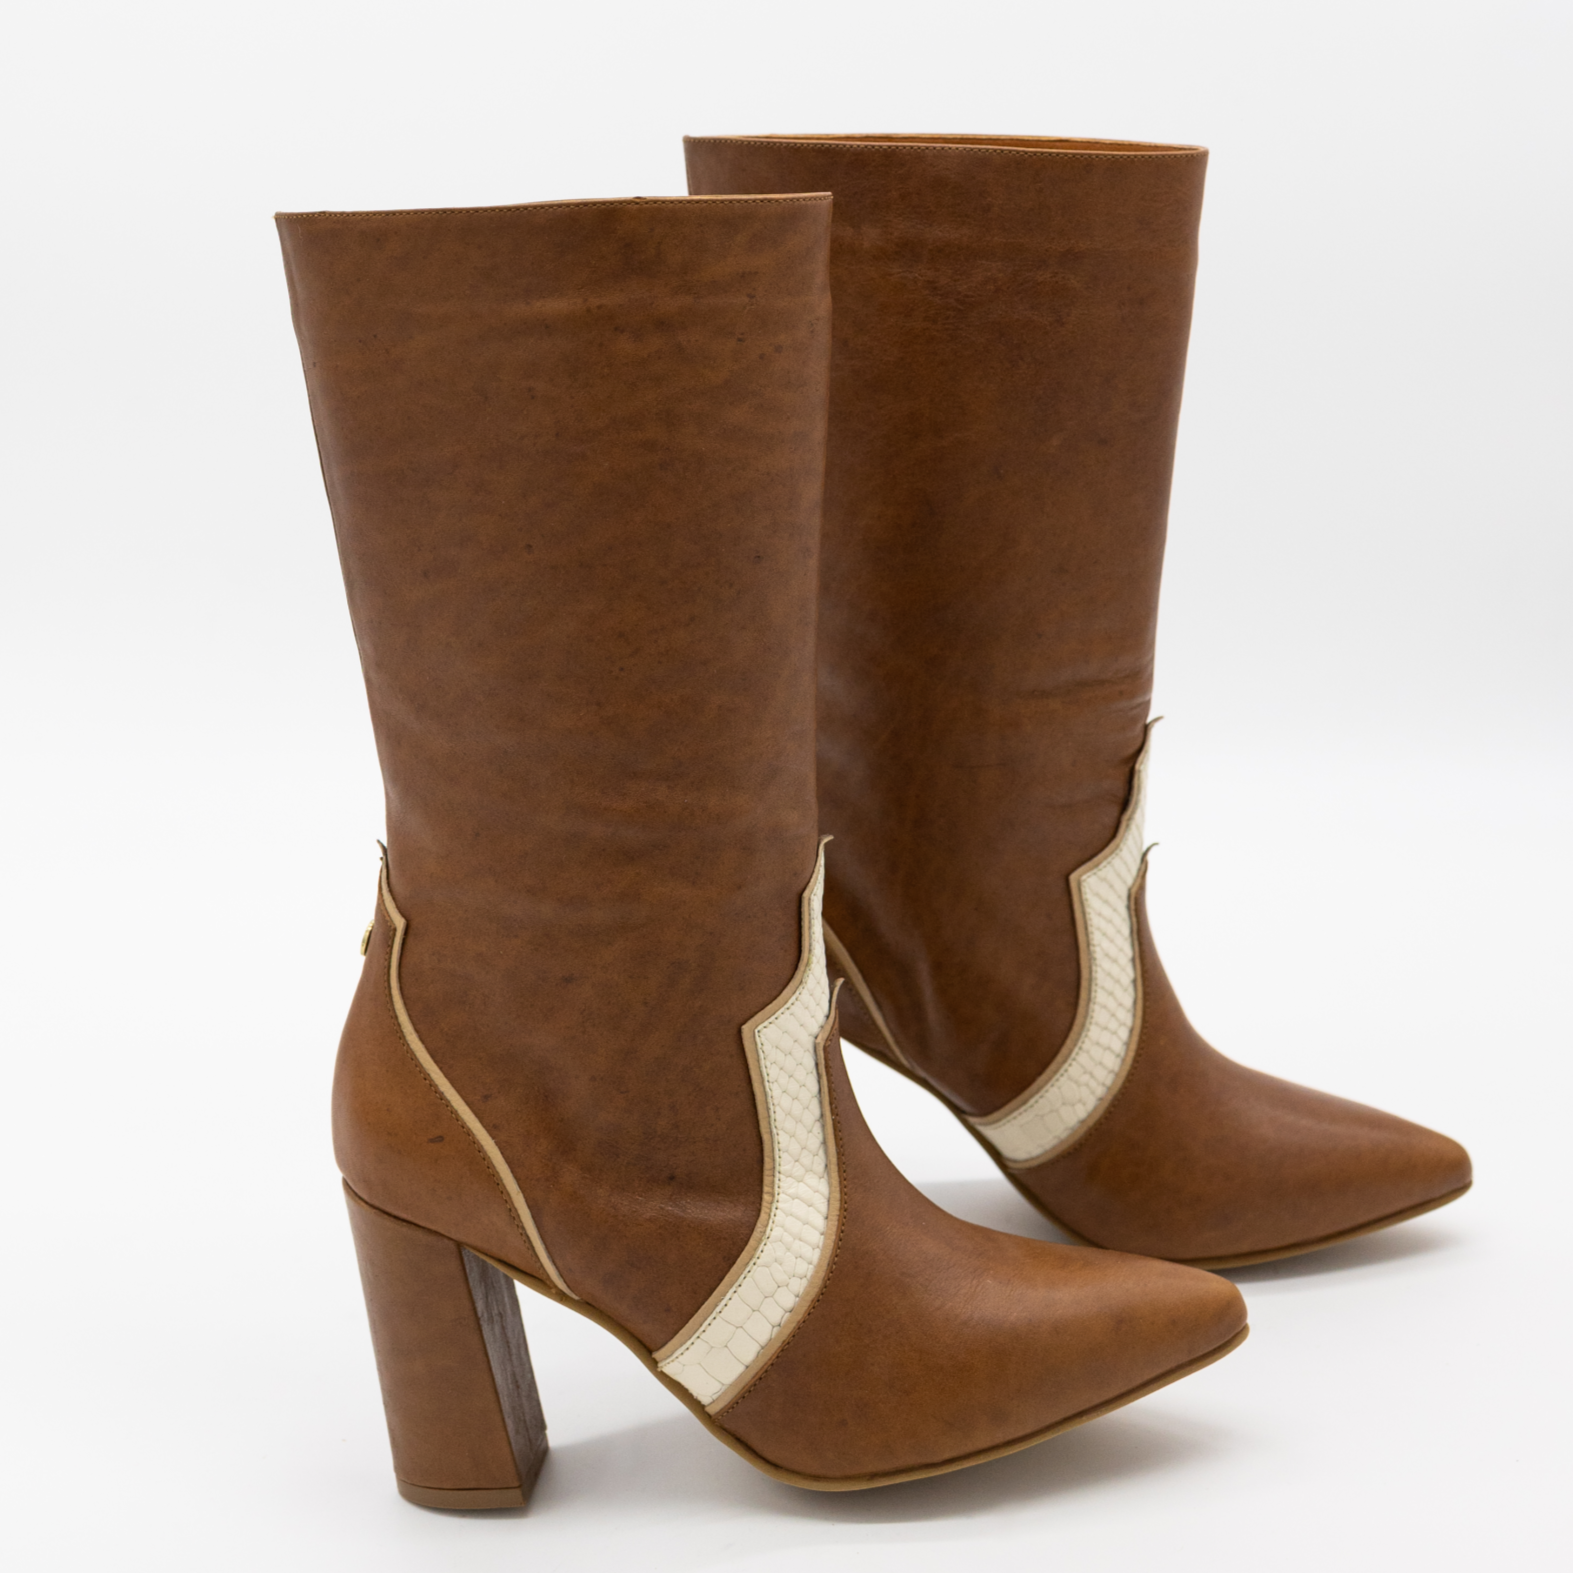 Handcrafted Leather Western Inspired Boots, Honey Tan Smooth Leather, Ivory White Embossed Leather, and Tan Arequipe Smooth Leather.